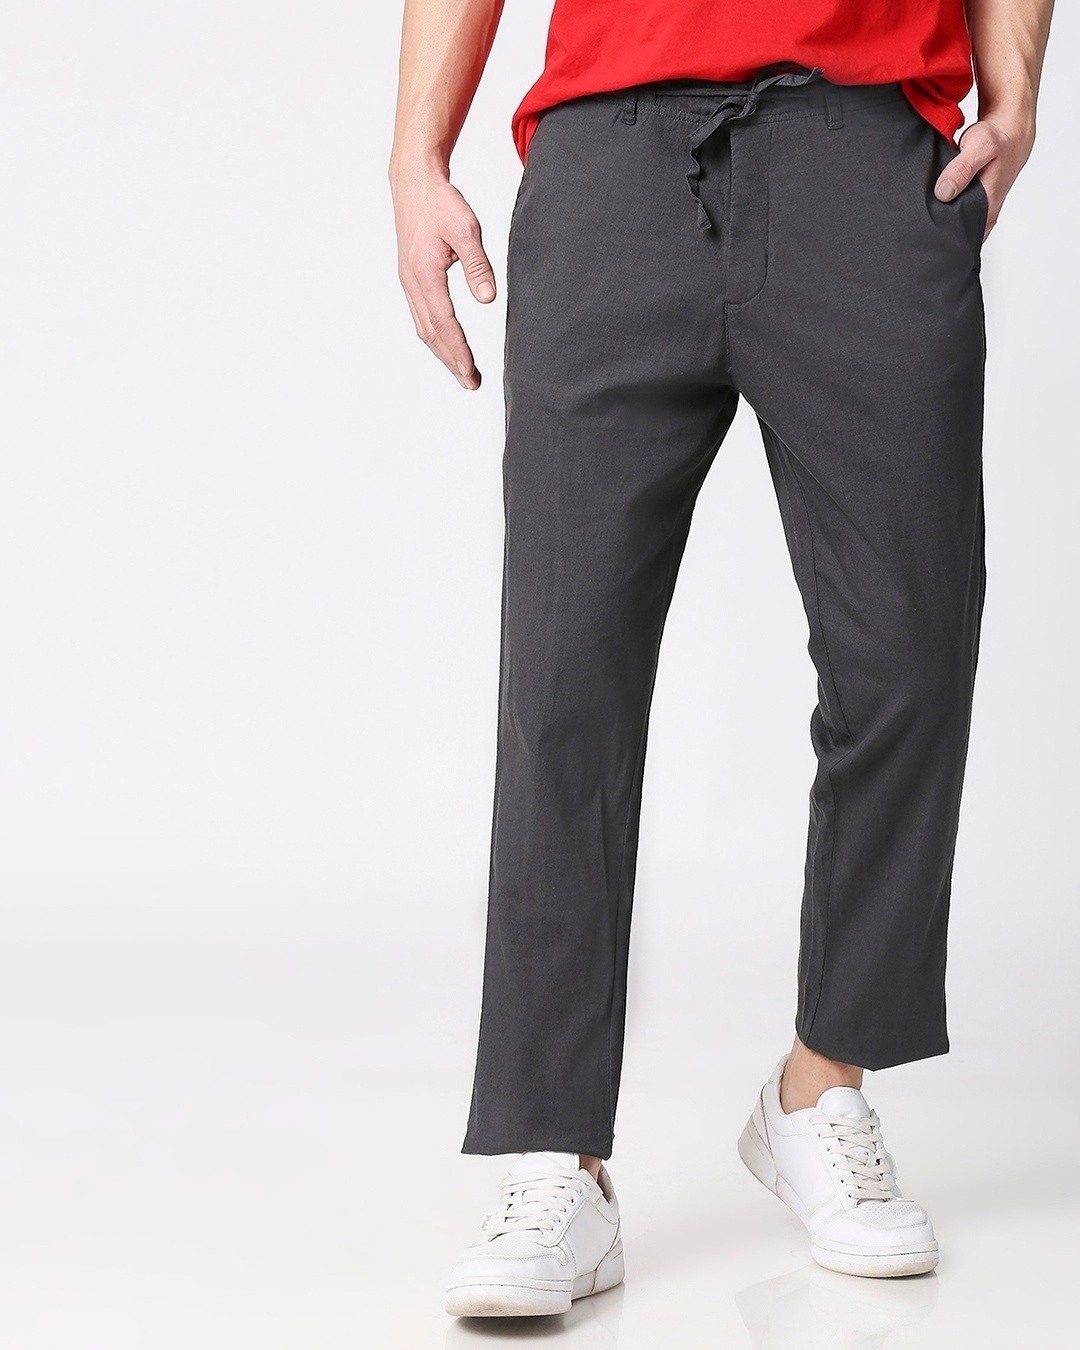 Discover more than 80 charcoal grey pants men - in.eteachers